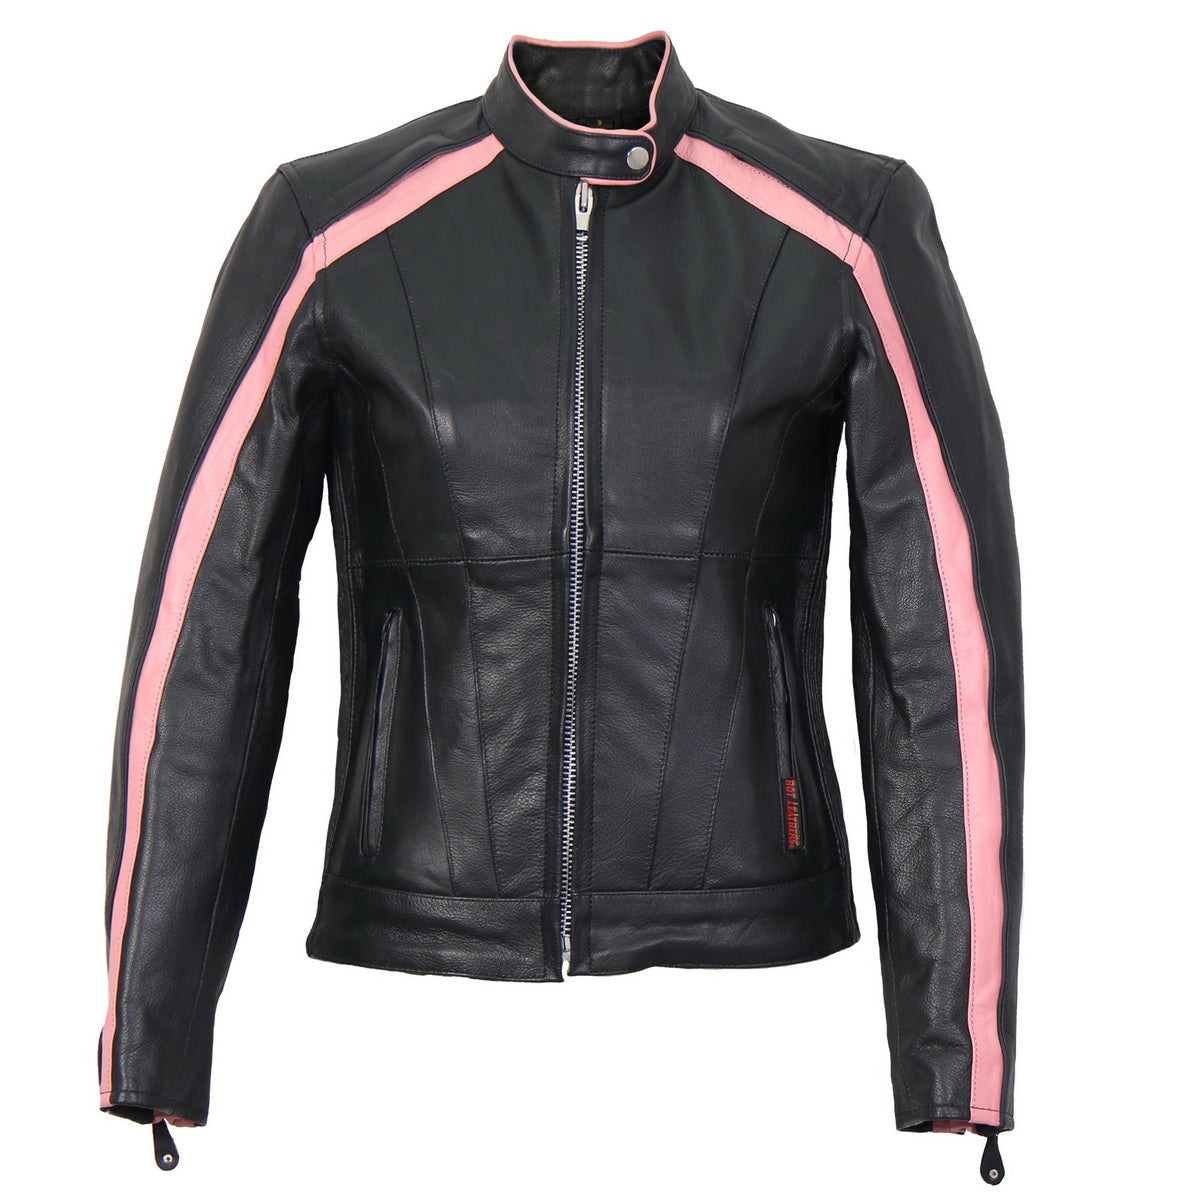 Bright Pink Leather Jacket with Sportsman Stripe